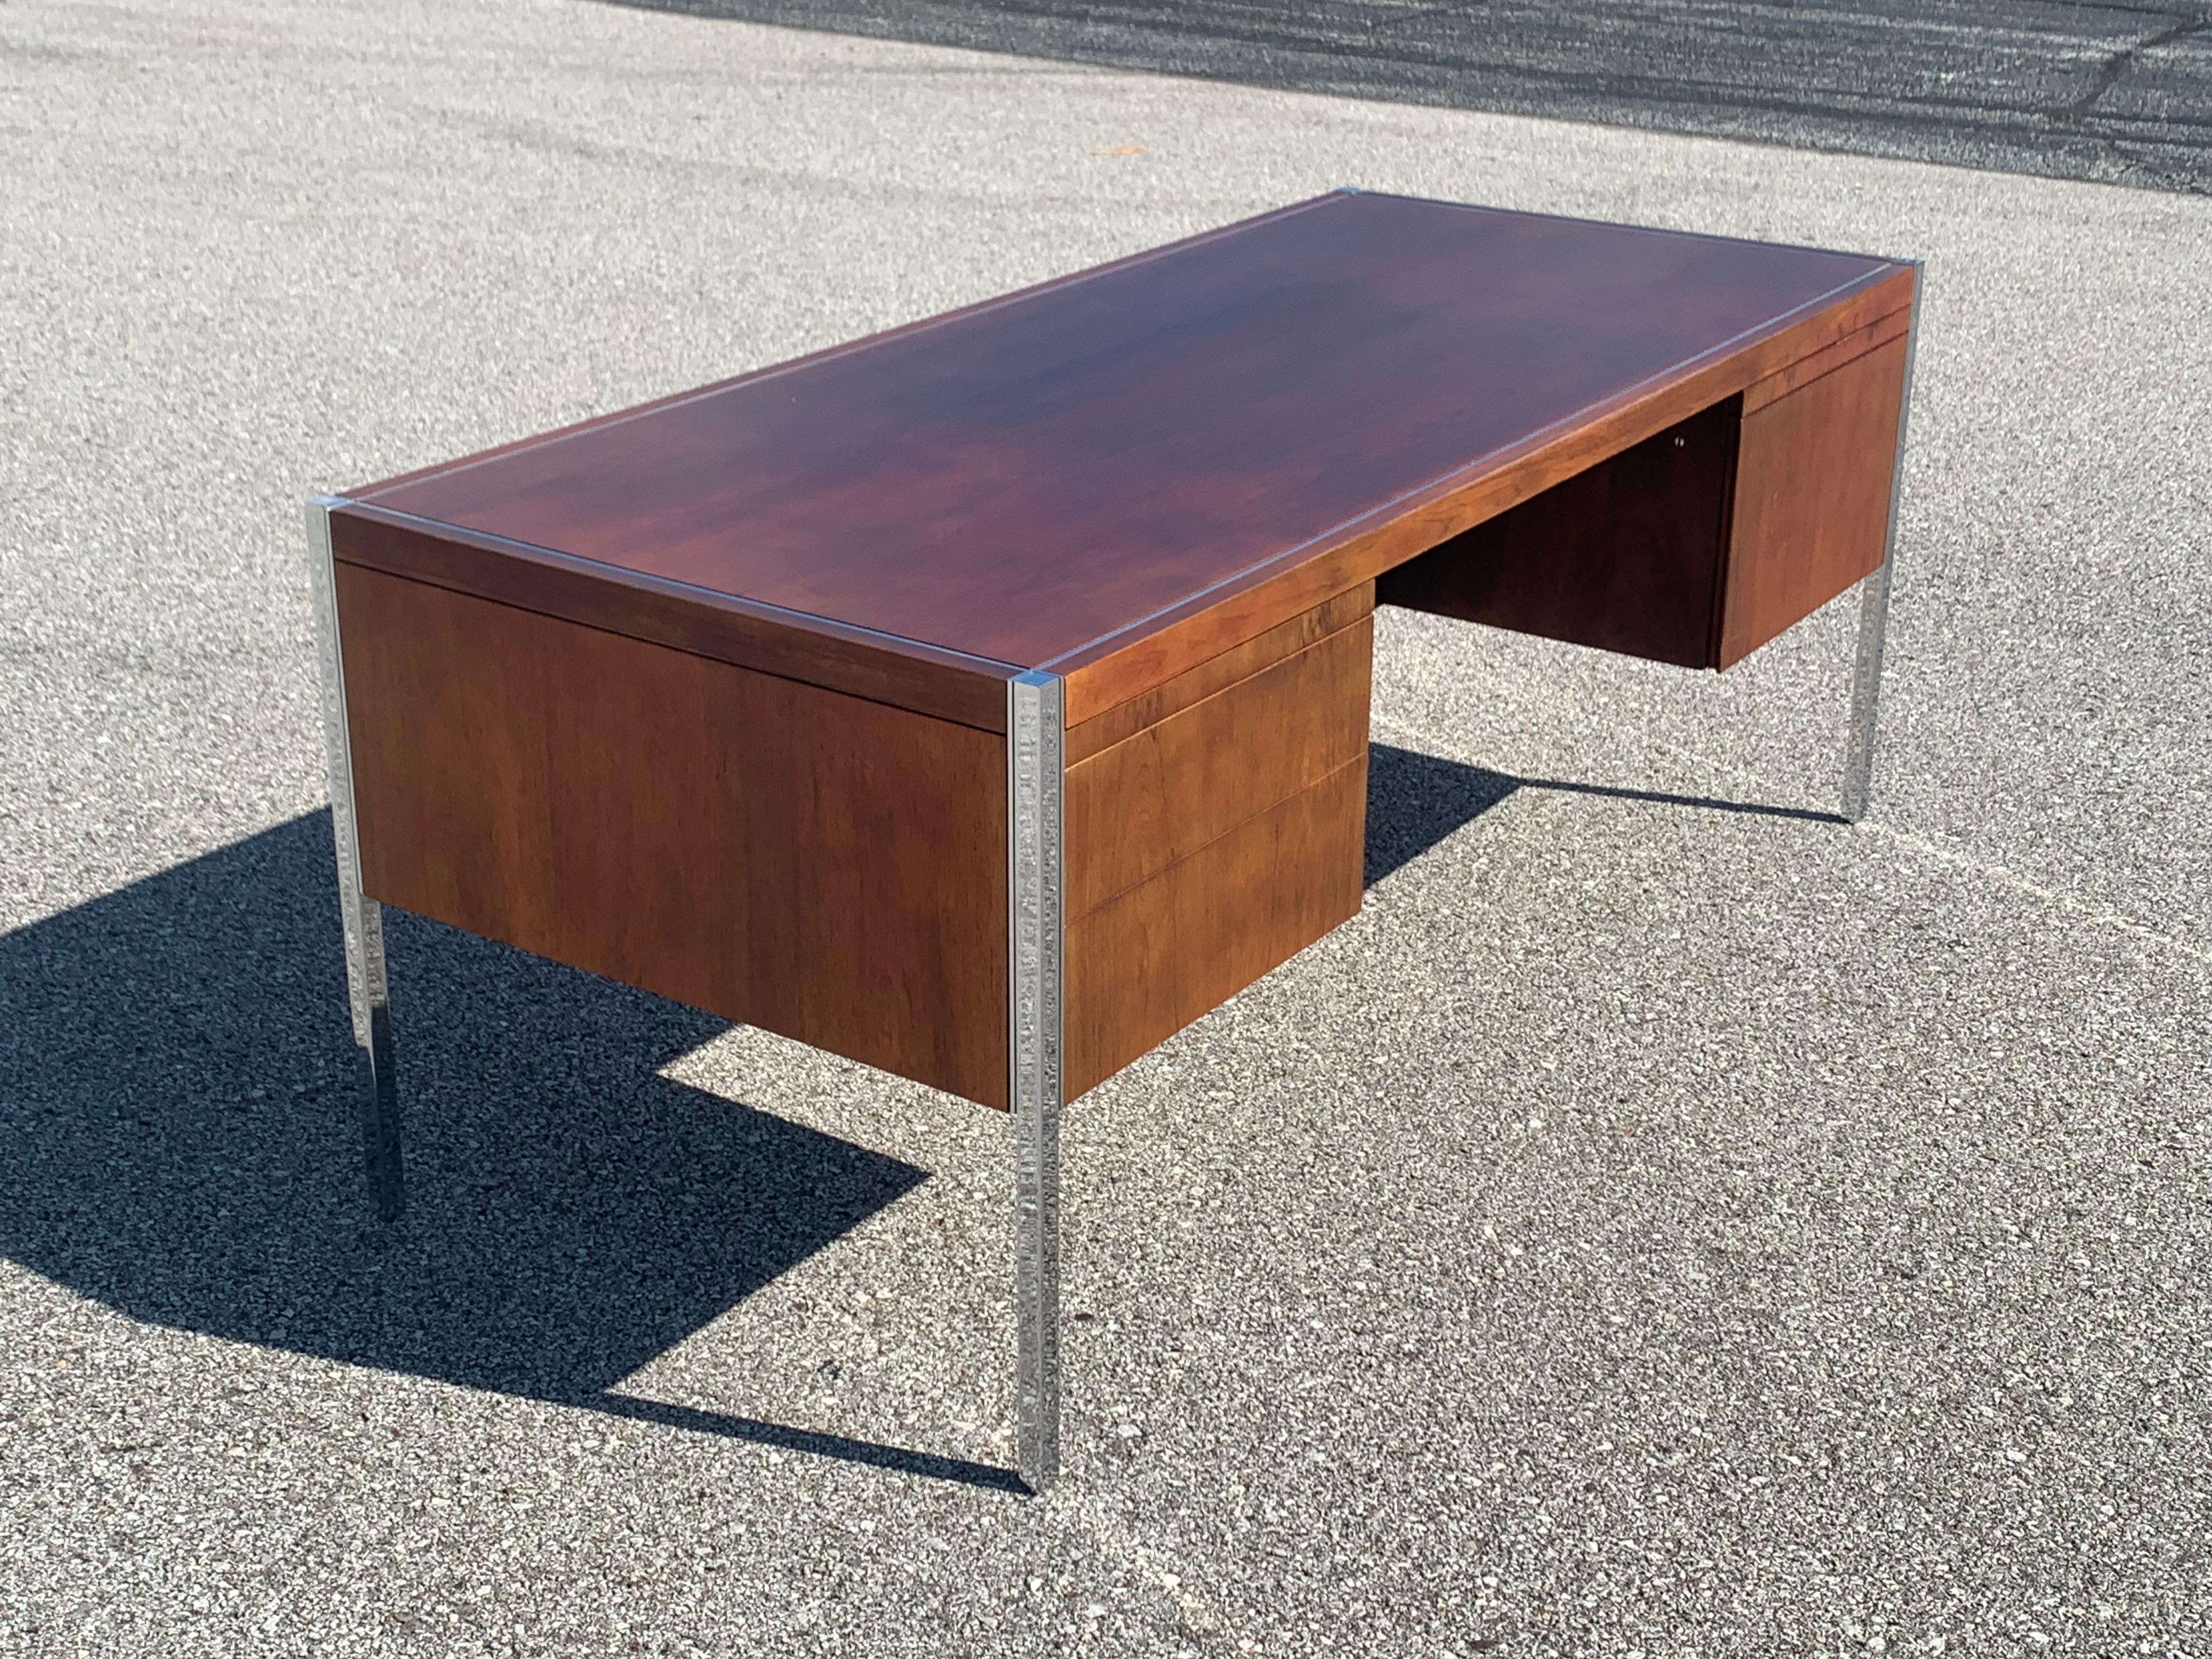 Impressive one owner executive desk ‘model 4146' designed by Richard Schultz and produced by Knoll International in the 1960’s. Desk features gorgeous rosewood veneer, chrome legs with adjustable glides, and unique chrome inlay accents to top.